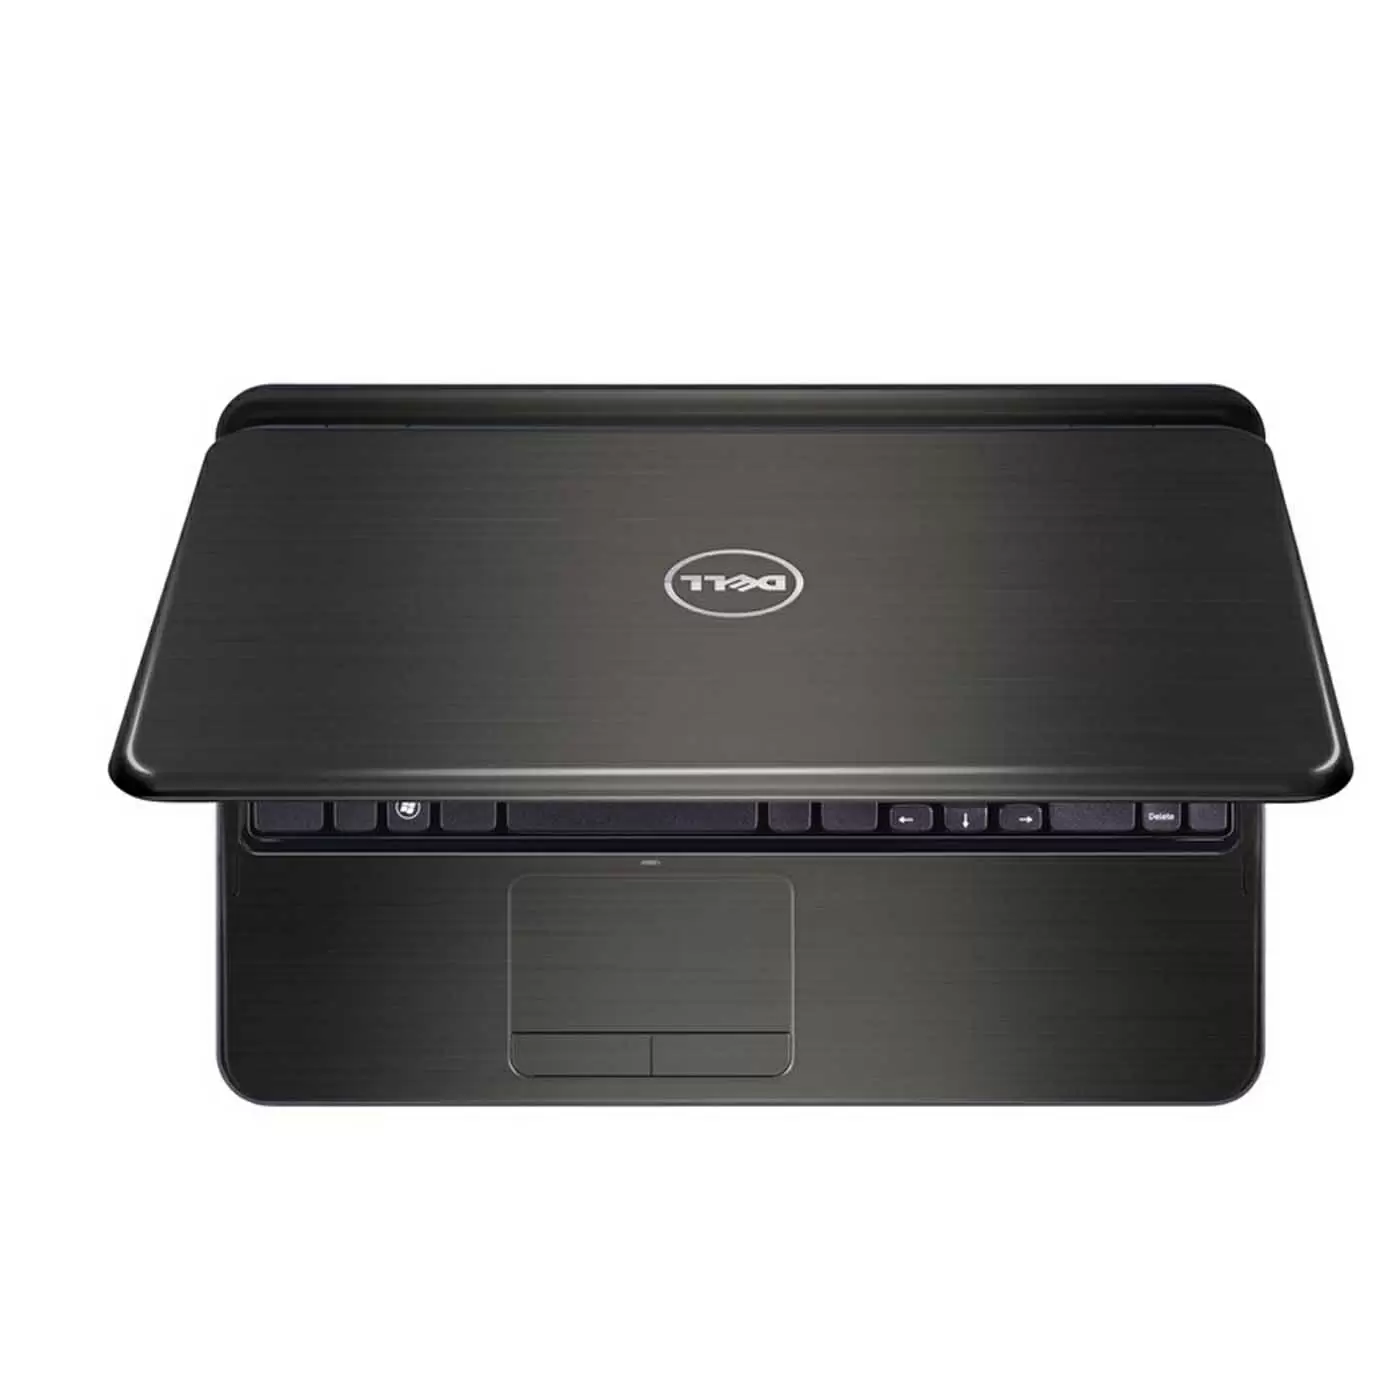 Dell N5110 Driver Download Windows 7